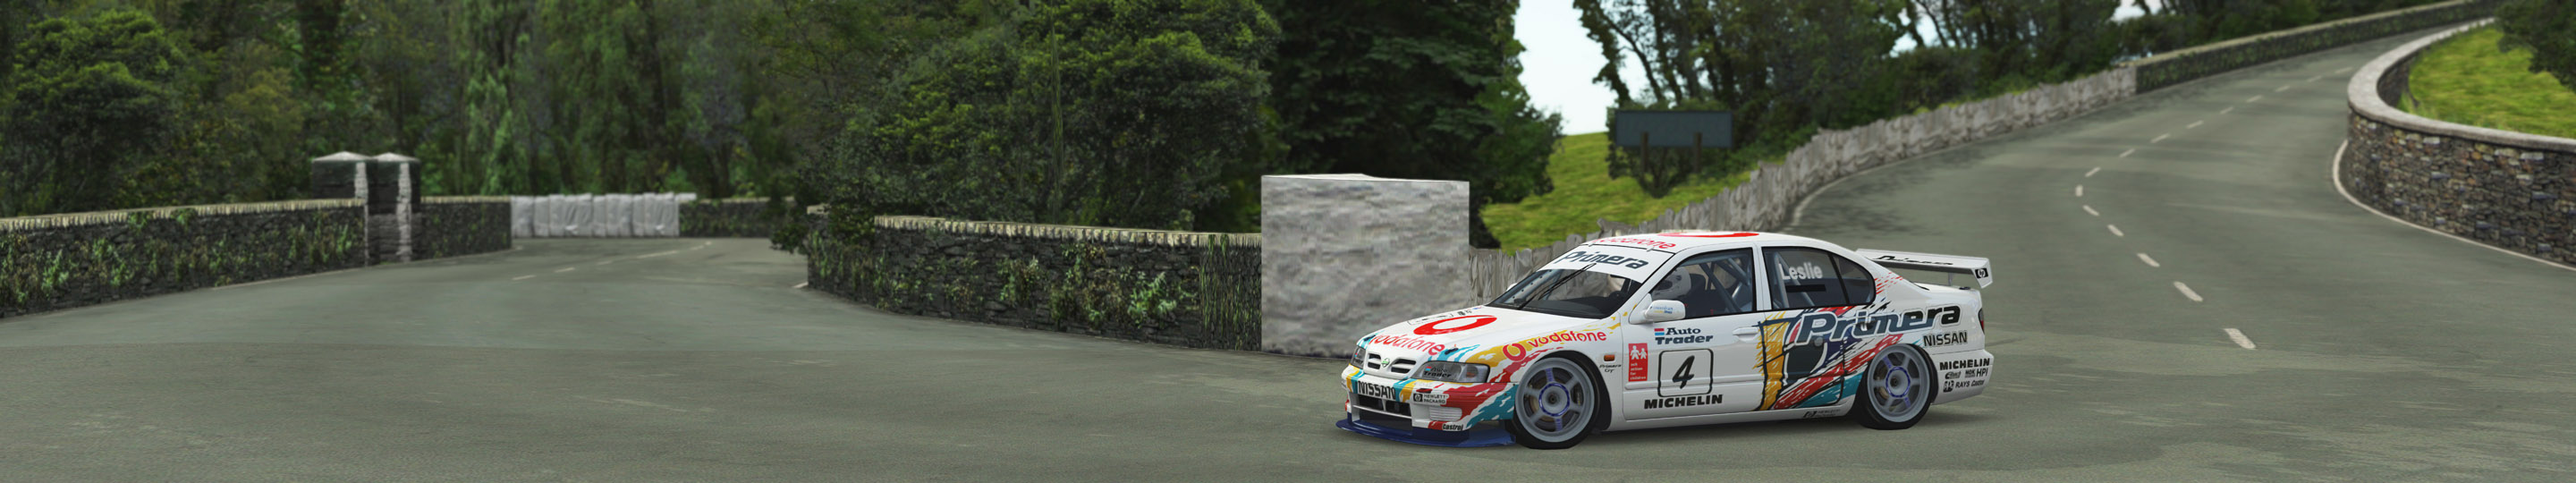 6 rFACTOR 2 ISLE of MAN by JIM PEARSON with NISSAN PRIMERA copy.jpg